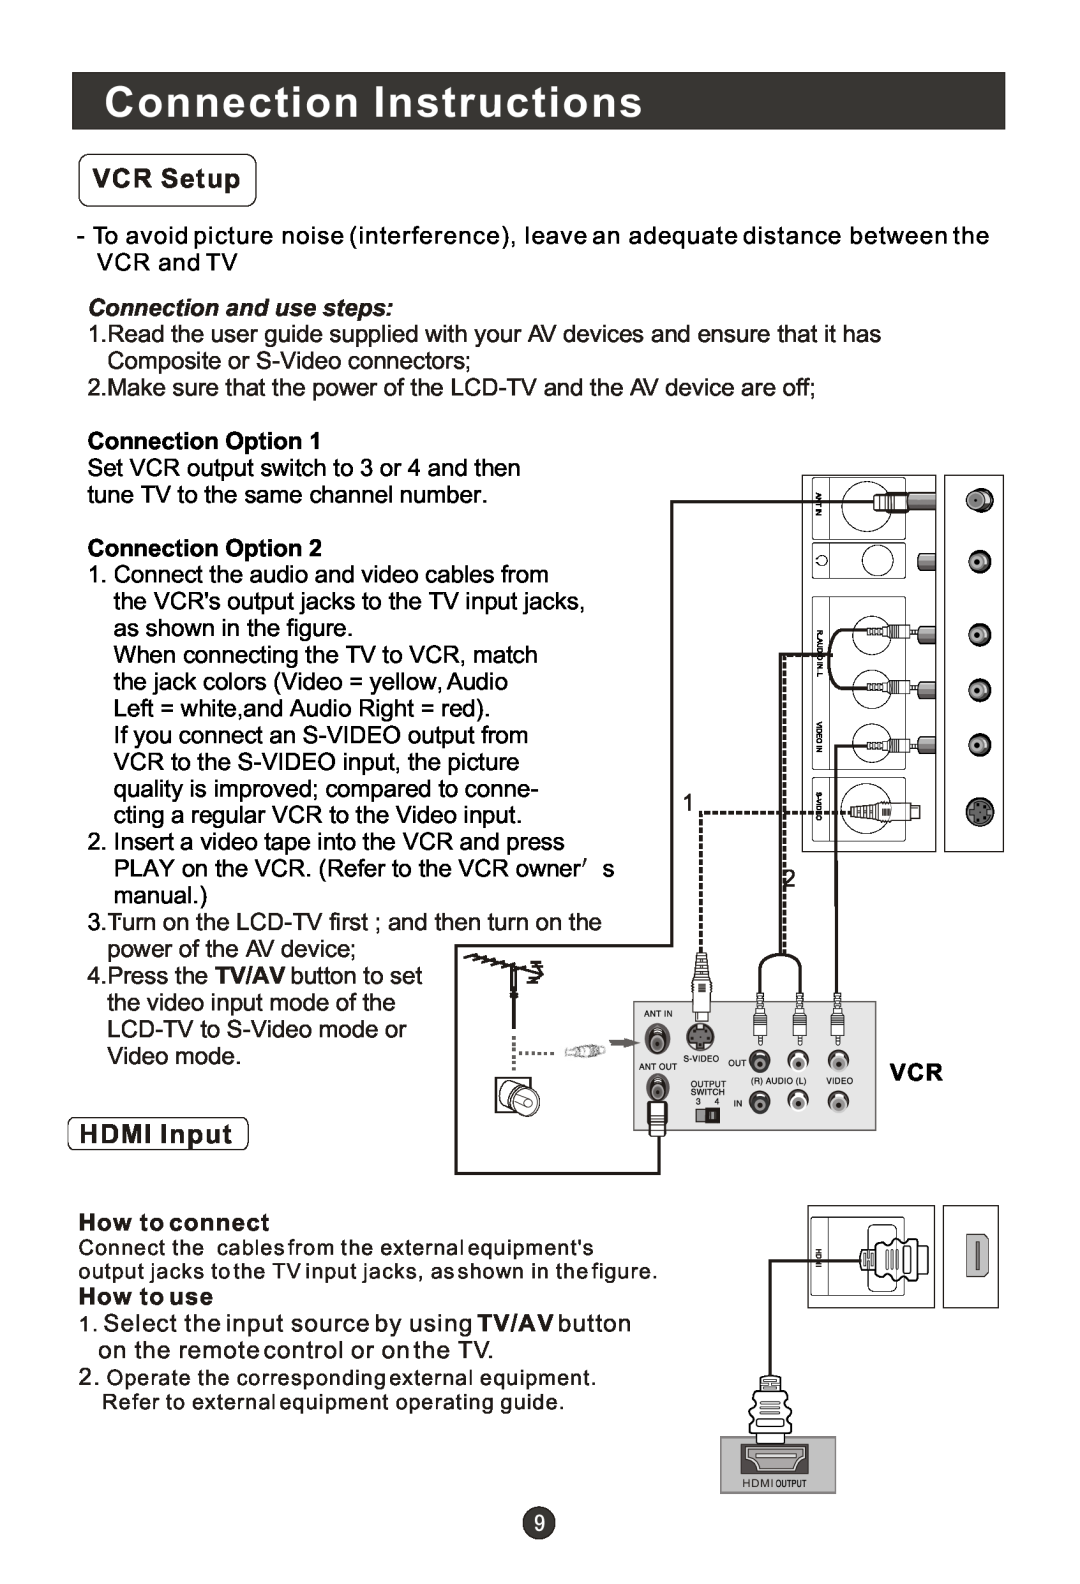 Haier HLC15T VCR Setup, HDMI Input, Connection Instructions, Connection and use steps, Connection Option, How to connect 